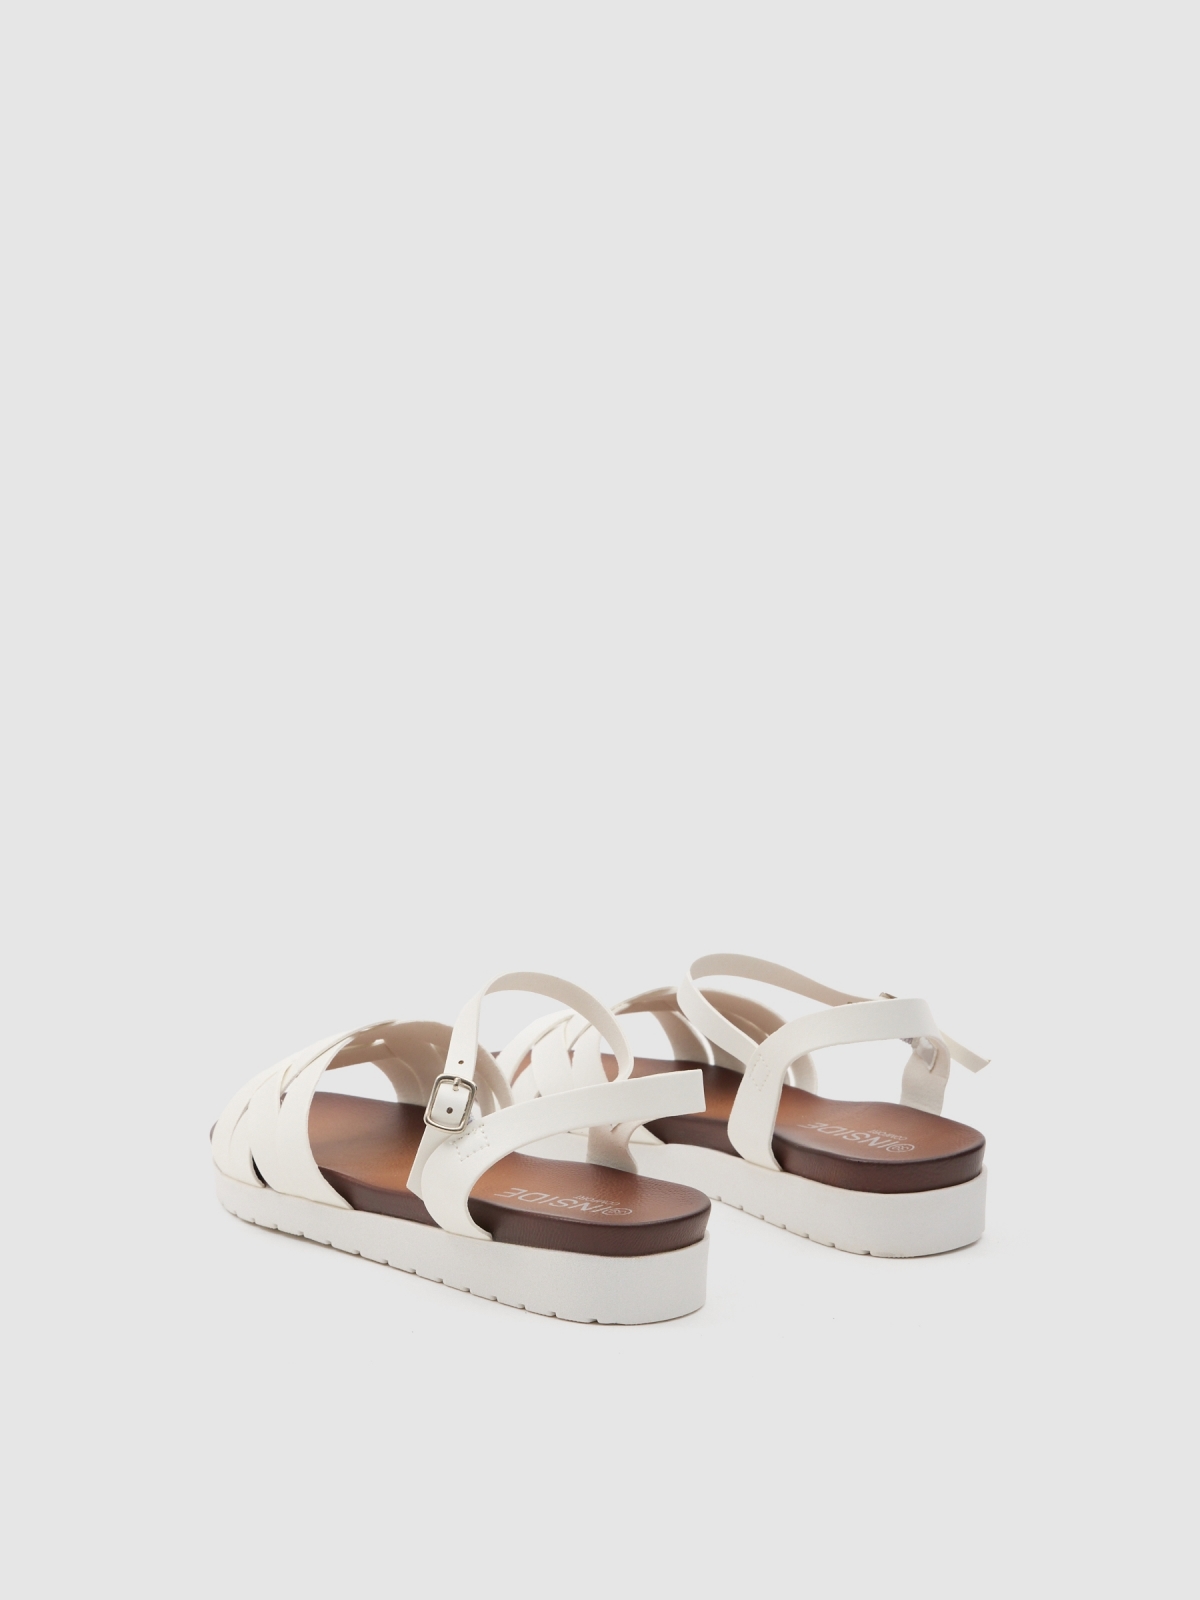 Crossed sandals white 45º back view